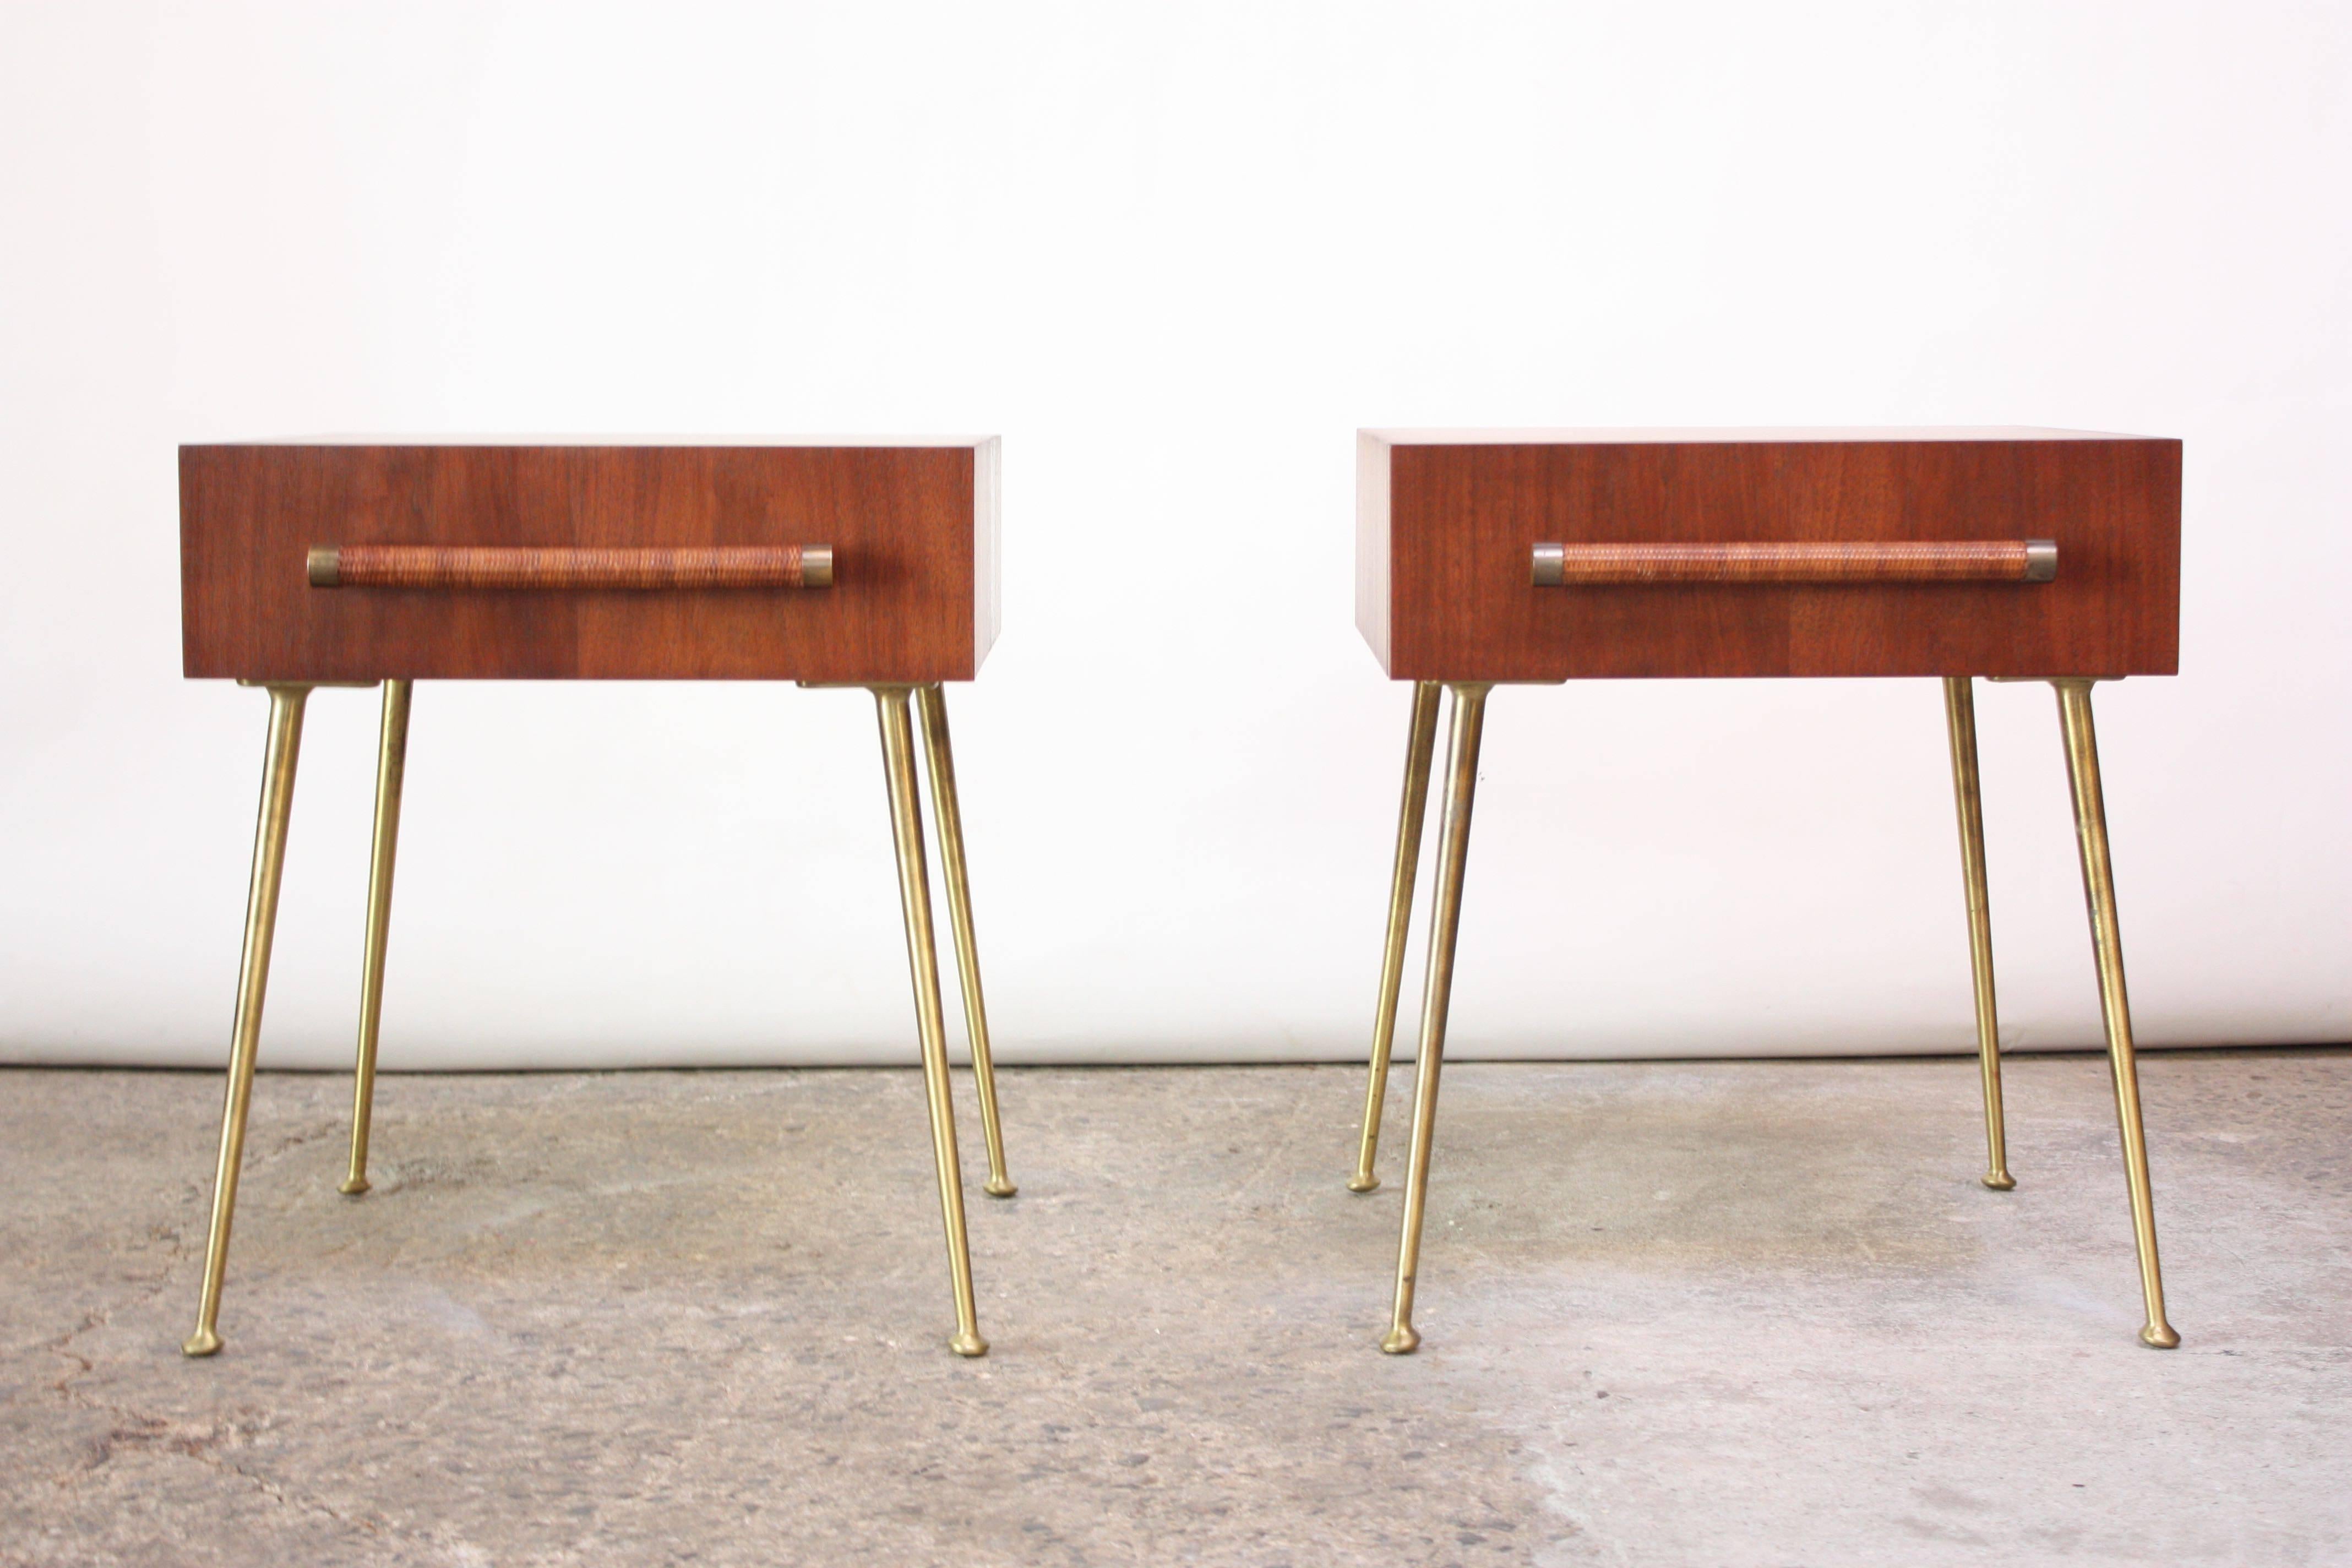 Pair of 1950s Robsjohn-Gibbings for Widdicomb single-drawer nightstands or end tables (model #4001) with brass legs / fittings and cane-wrapped drawer pulls. Finished on all sides, including the back.
Beautiful, restored condition, except brass